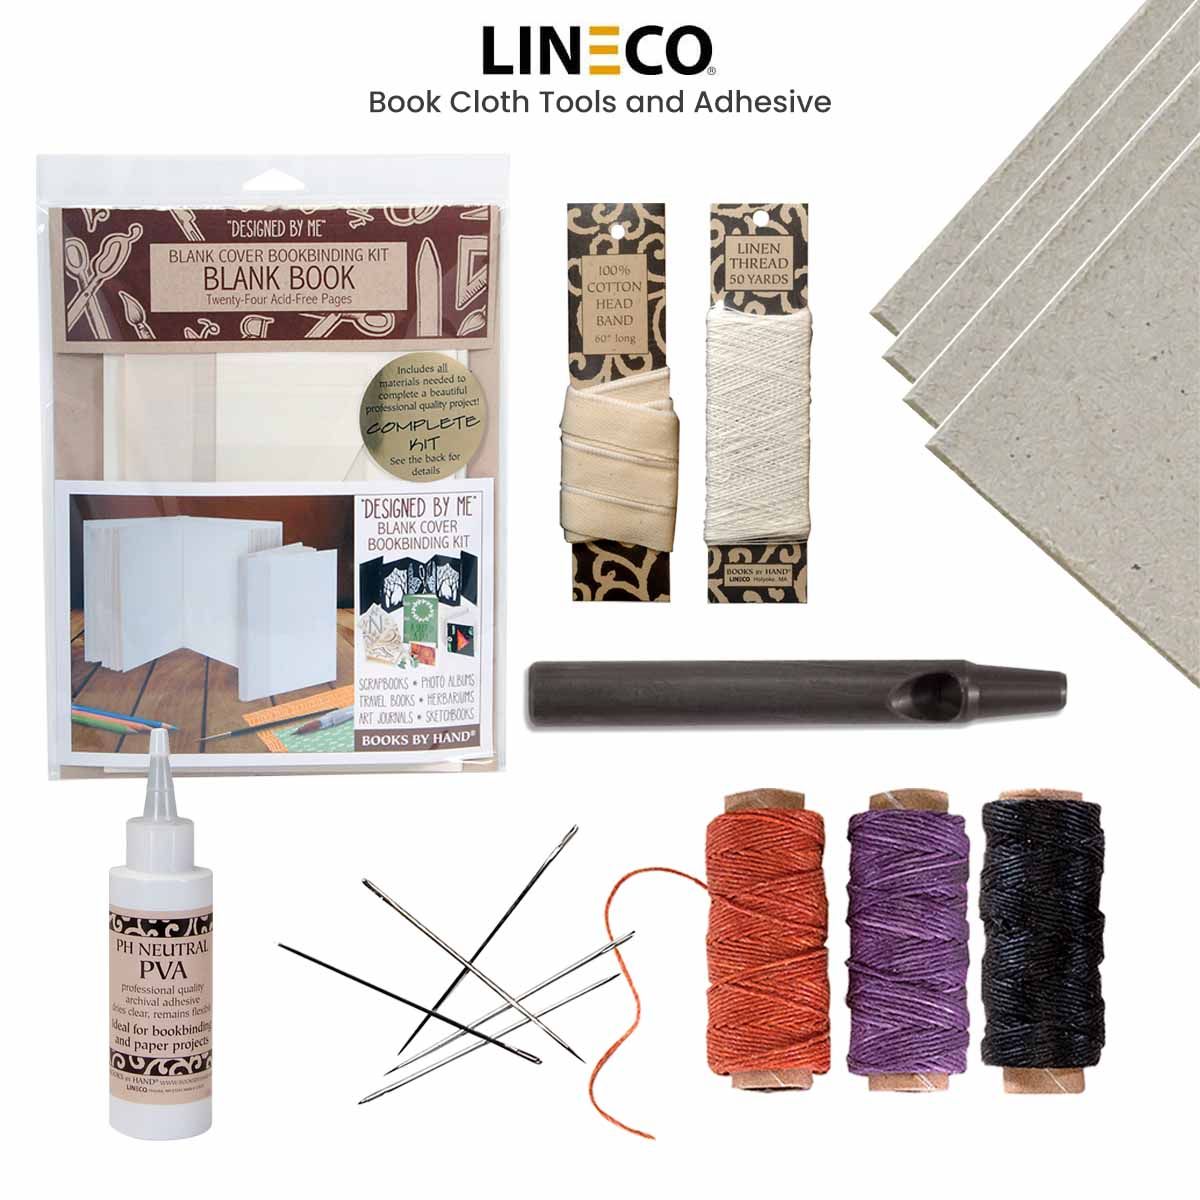 LINECO Neutral pH Adhesive 8 Oz, Acid-Free, All-purpose Glue, Dries Clear  and Remains Flexible. Used for Bookbinding and Book Repair, Framing